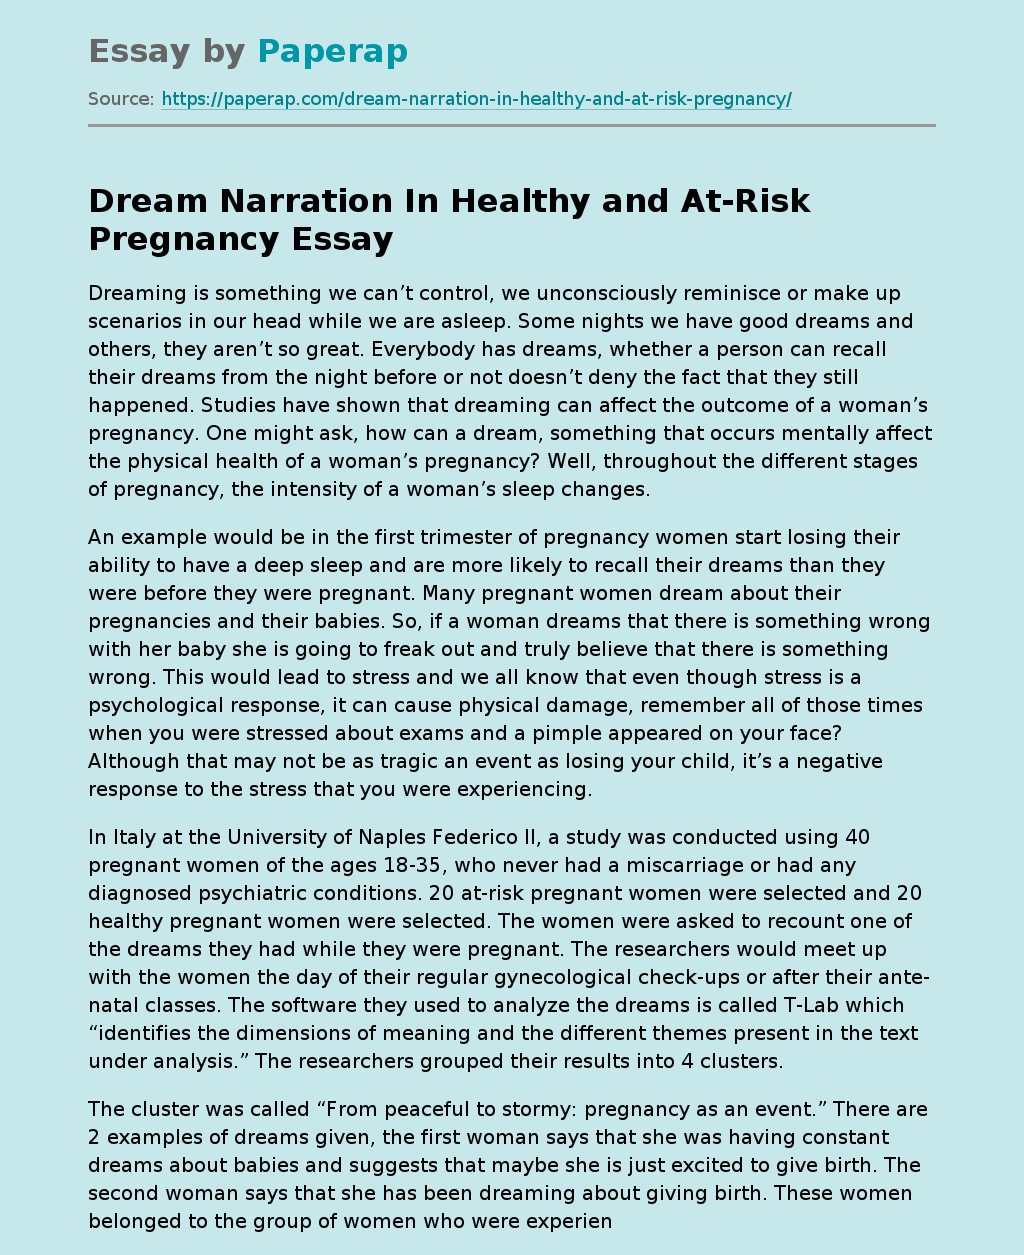 Dream Narration In Healthy and At-Risk Pregnancy